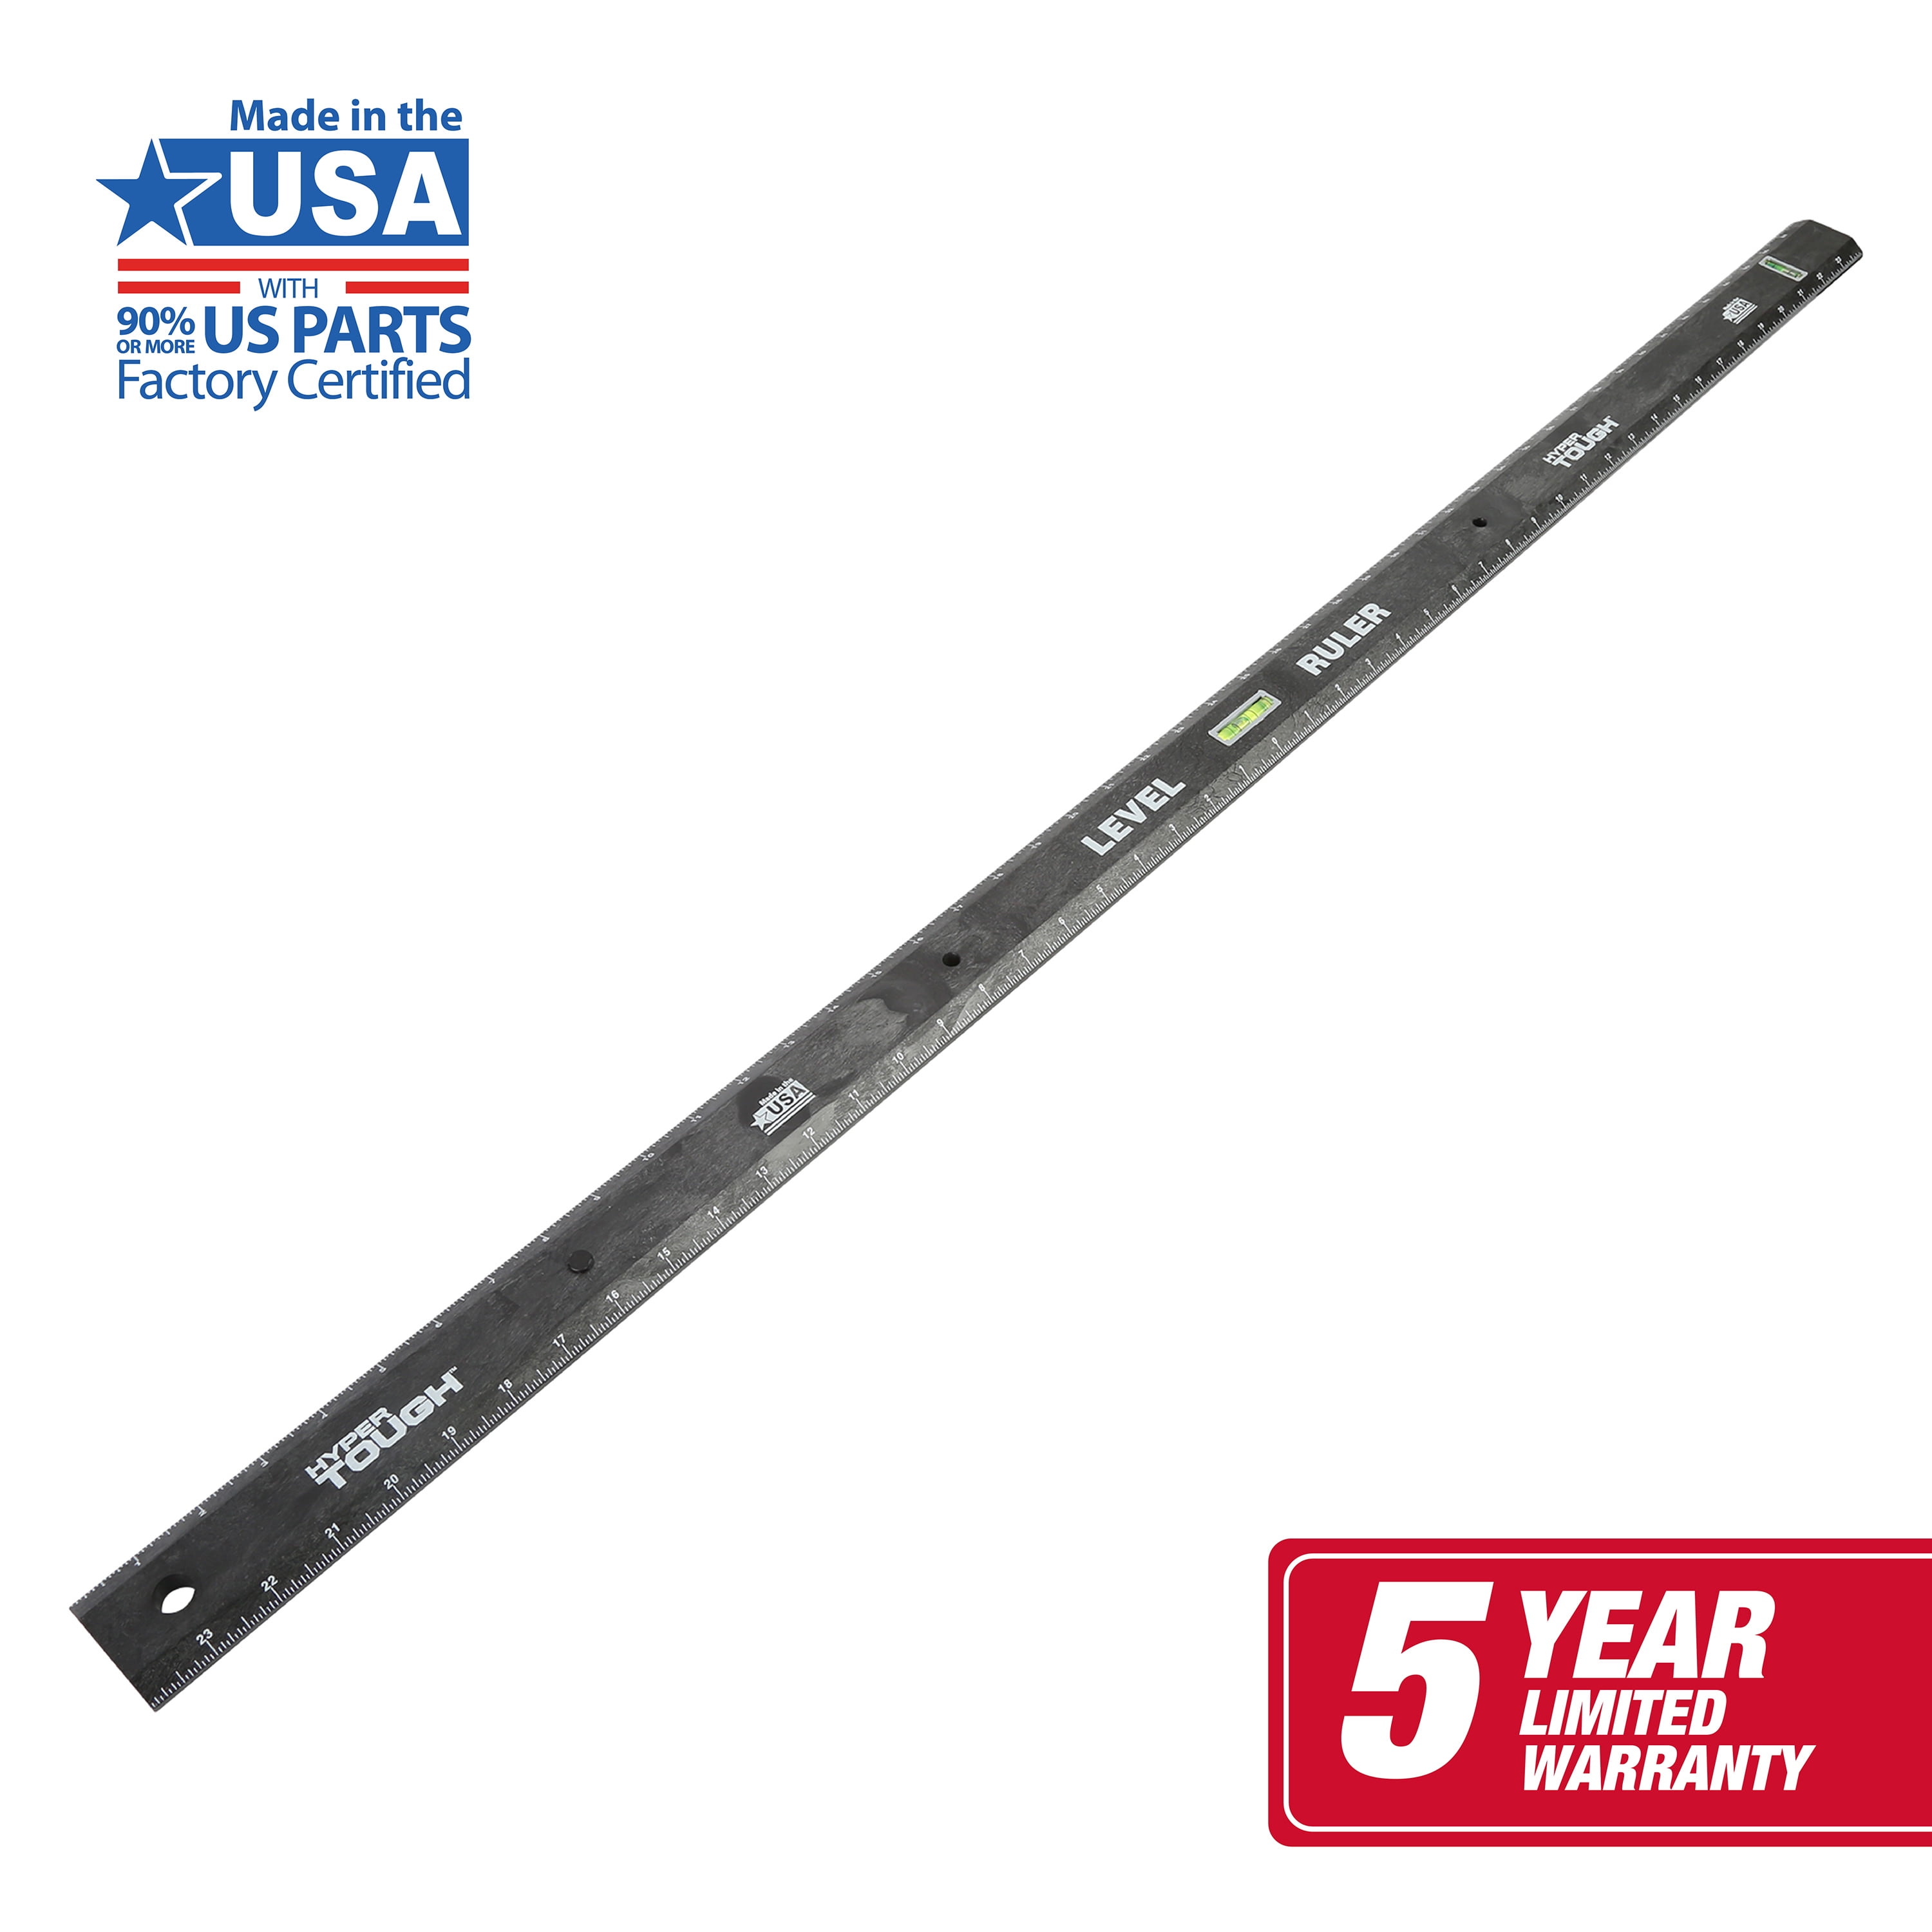 Hyper Tough 48" Poly Level Ruler with Easy to Read Measuring